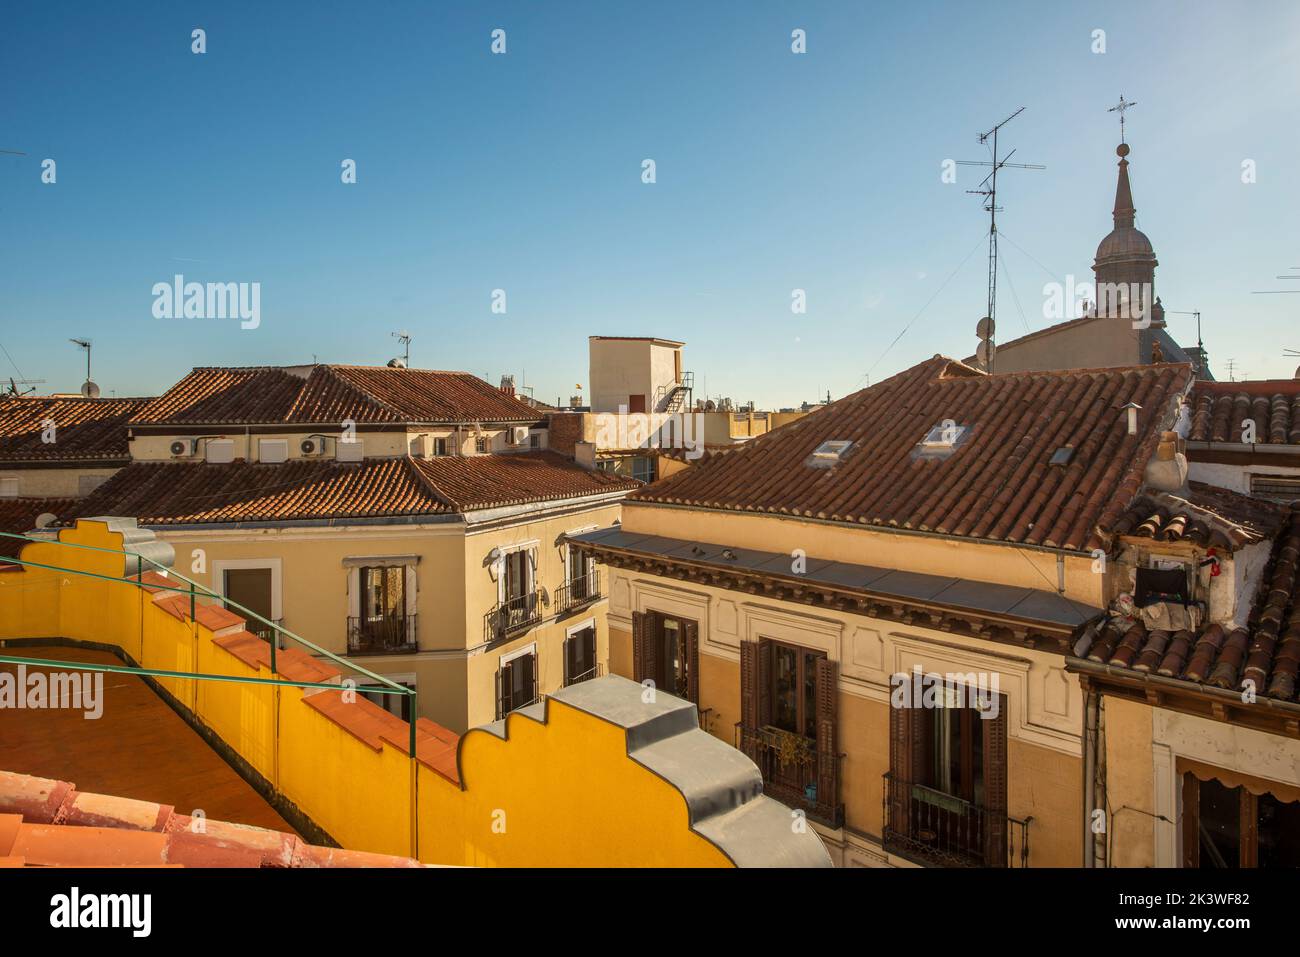 Clay roofs and church domes on a day with clear skies in Madrid Stock Photo